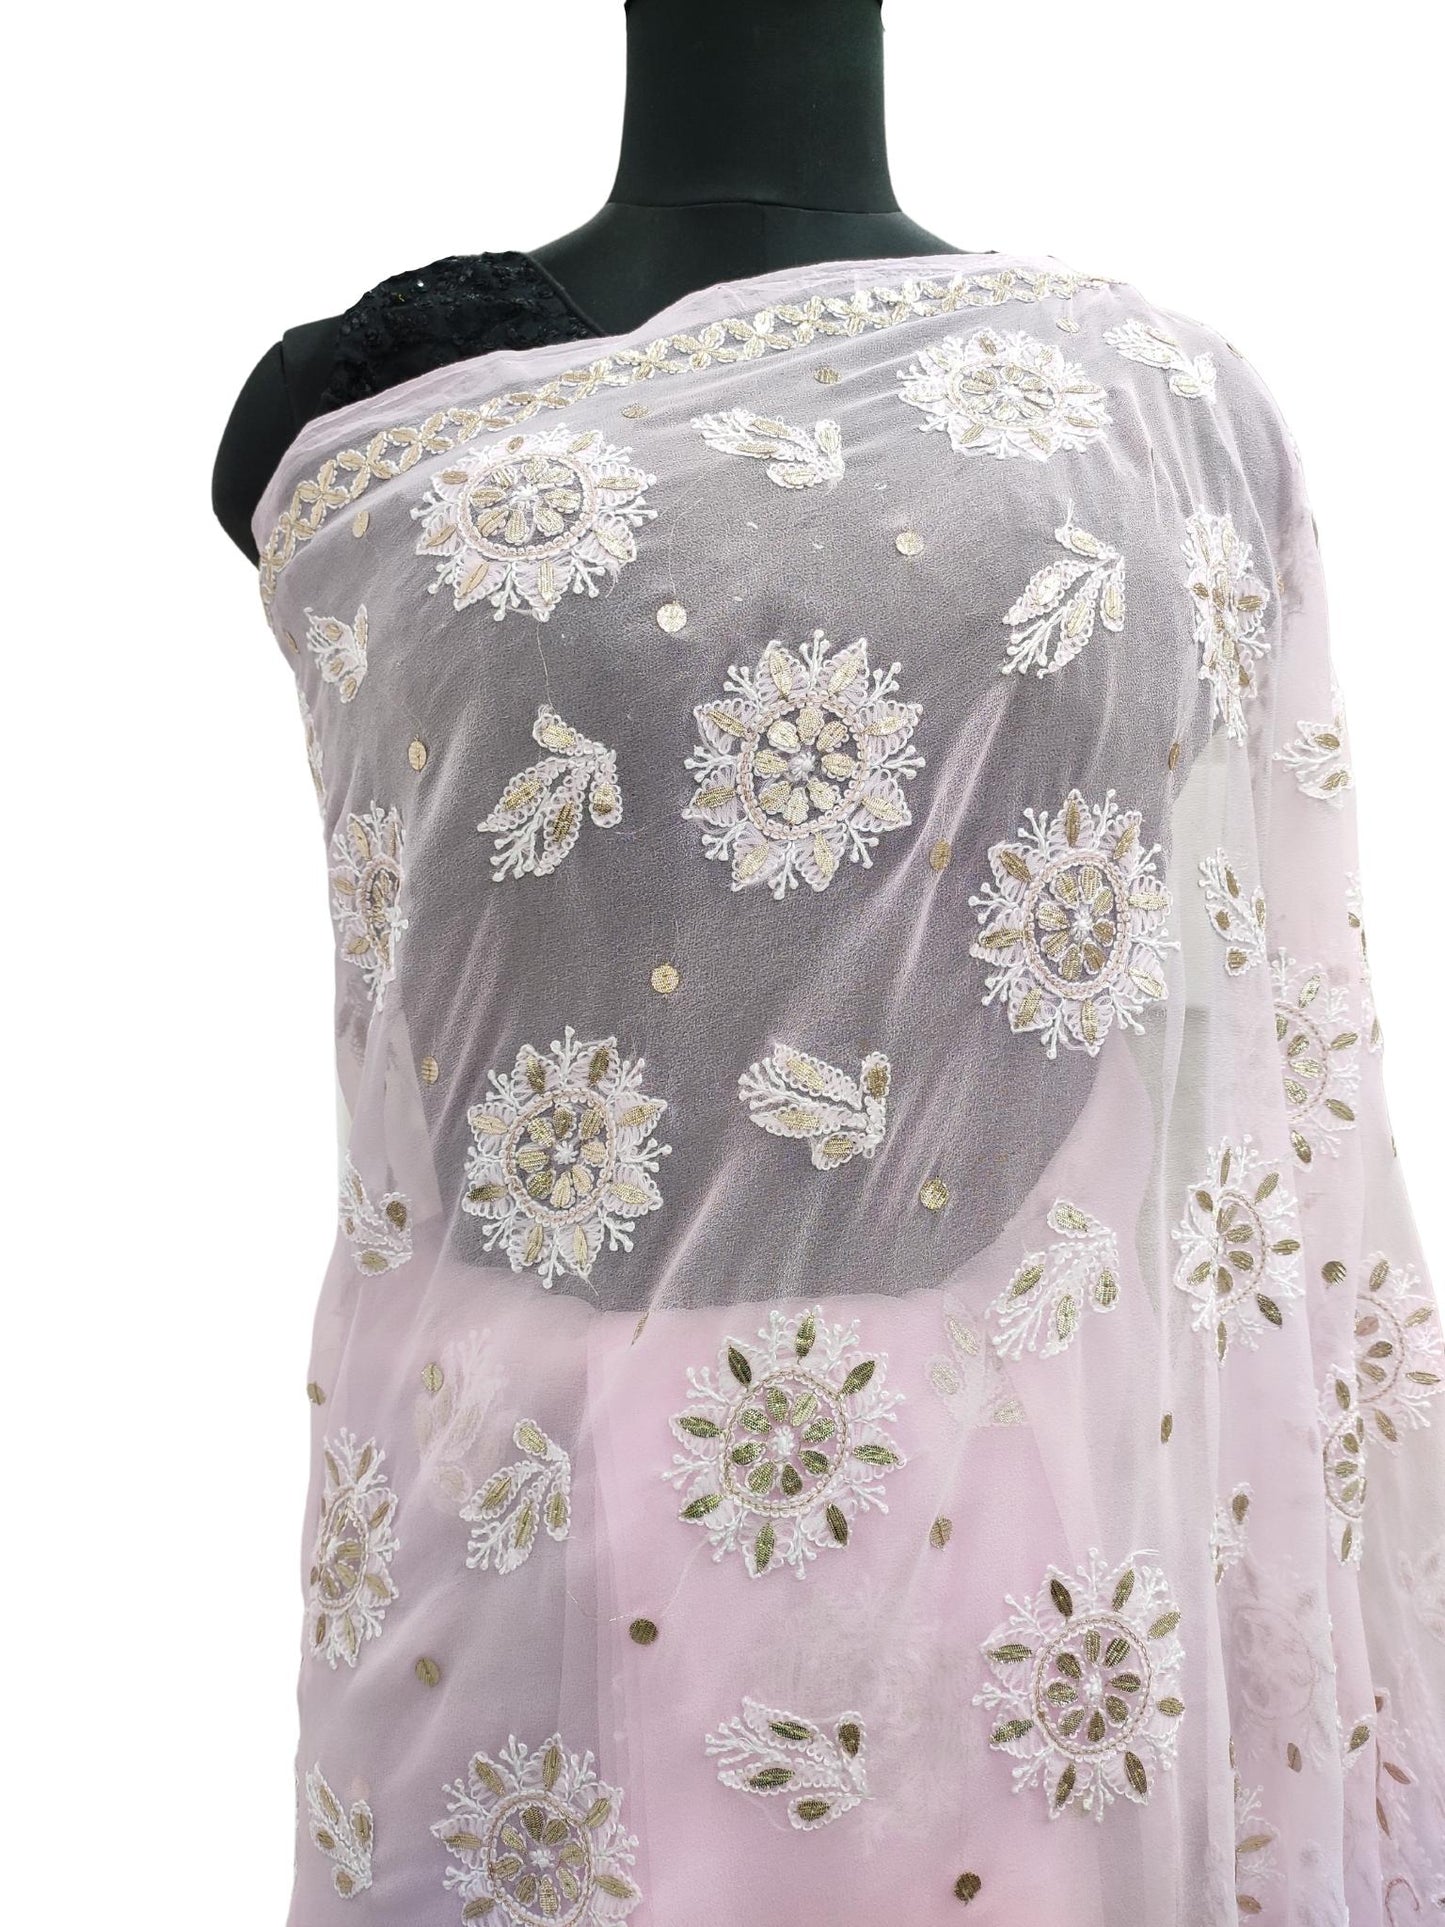 Shyamal Chikan Hand Embroidered Pink Georgette Lucknowi Chikankari Skirt Saree With Blouse Piece And Gotta Patti Work - S16716